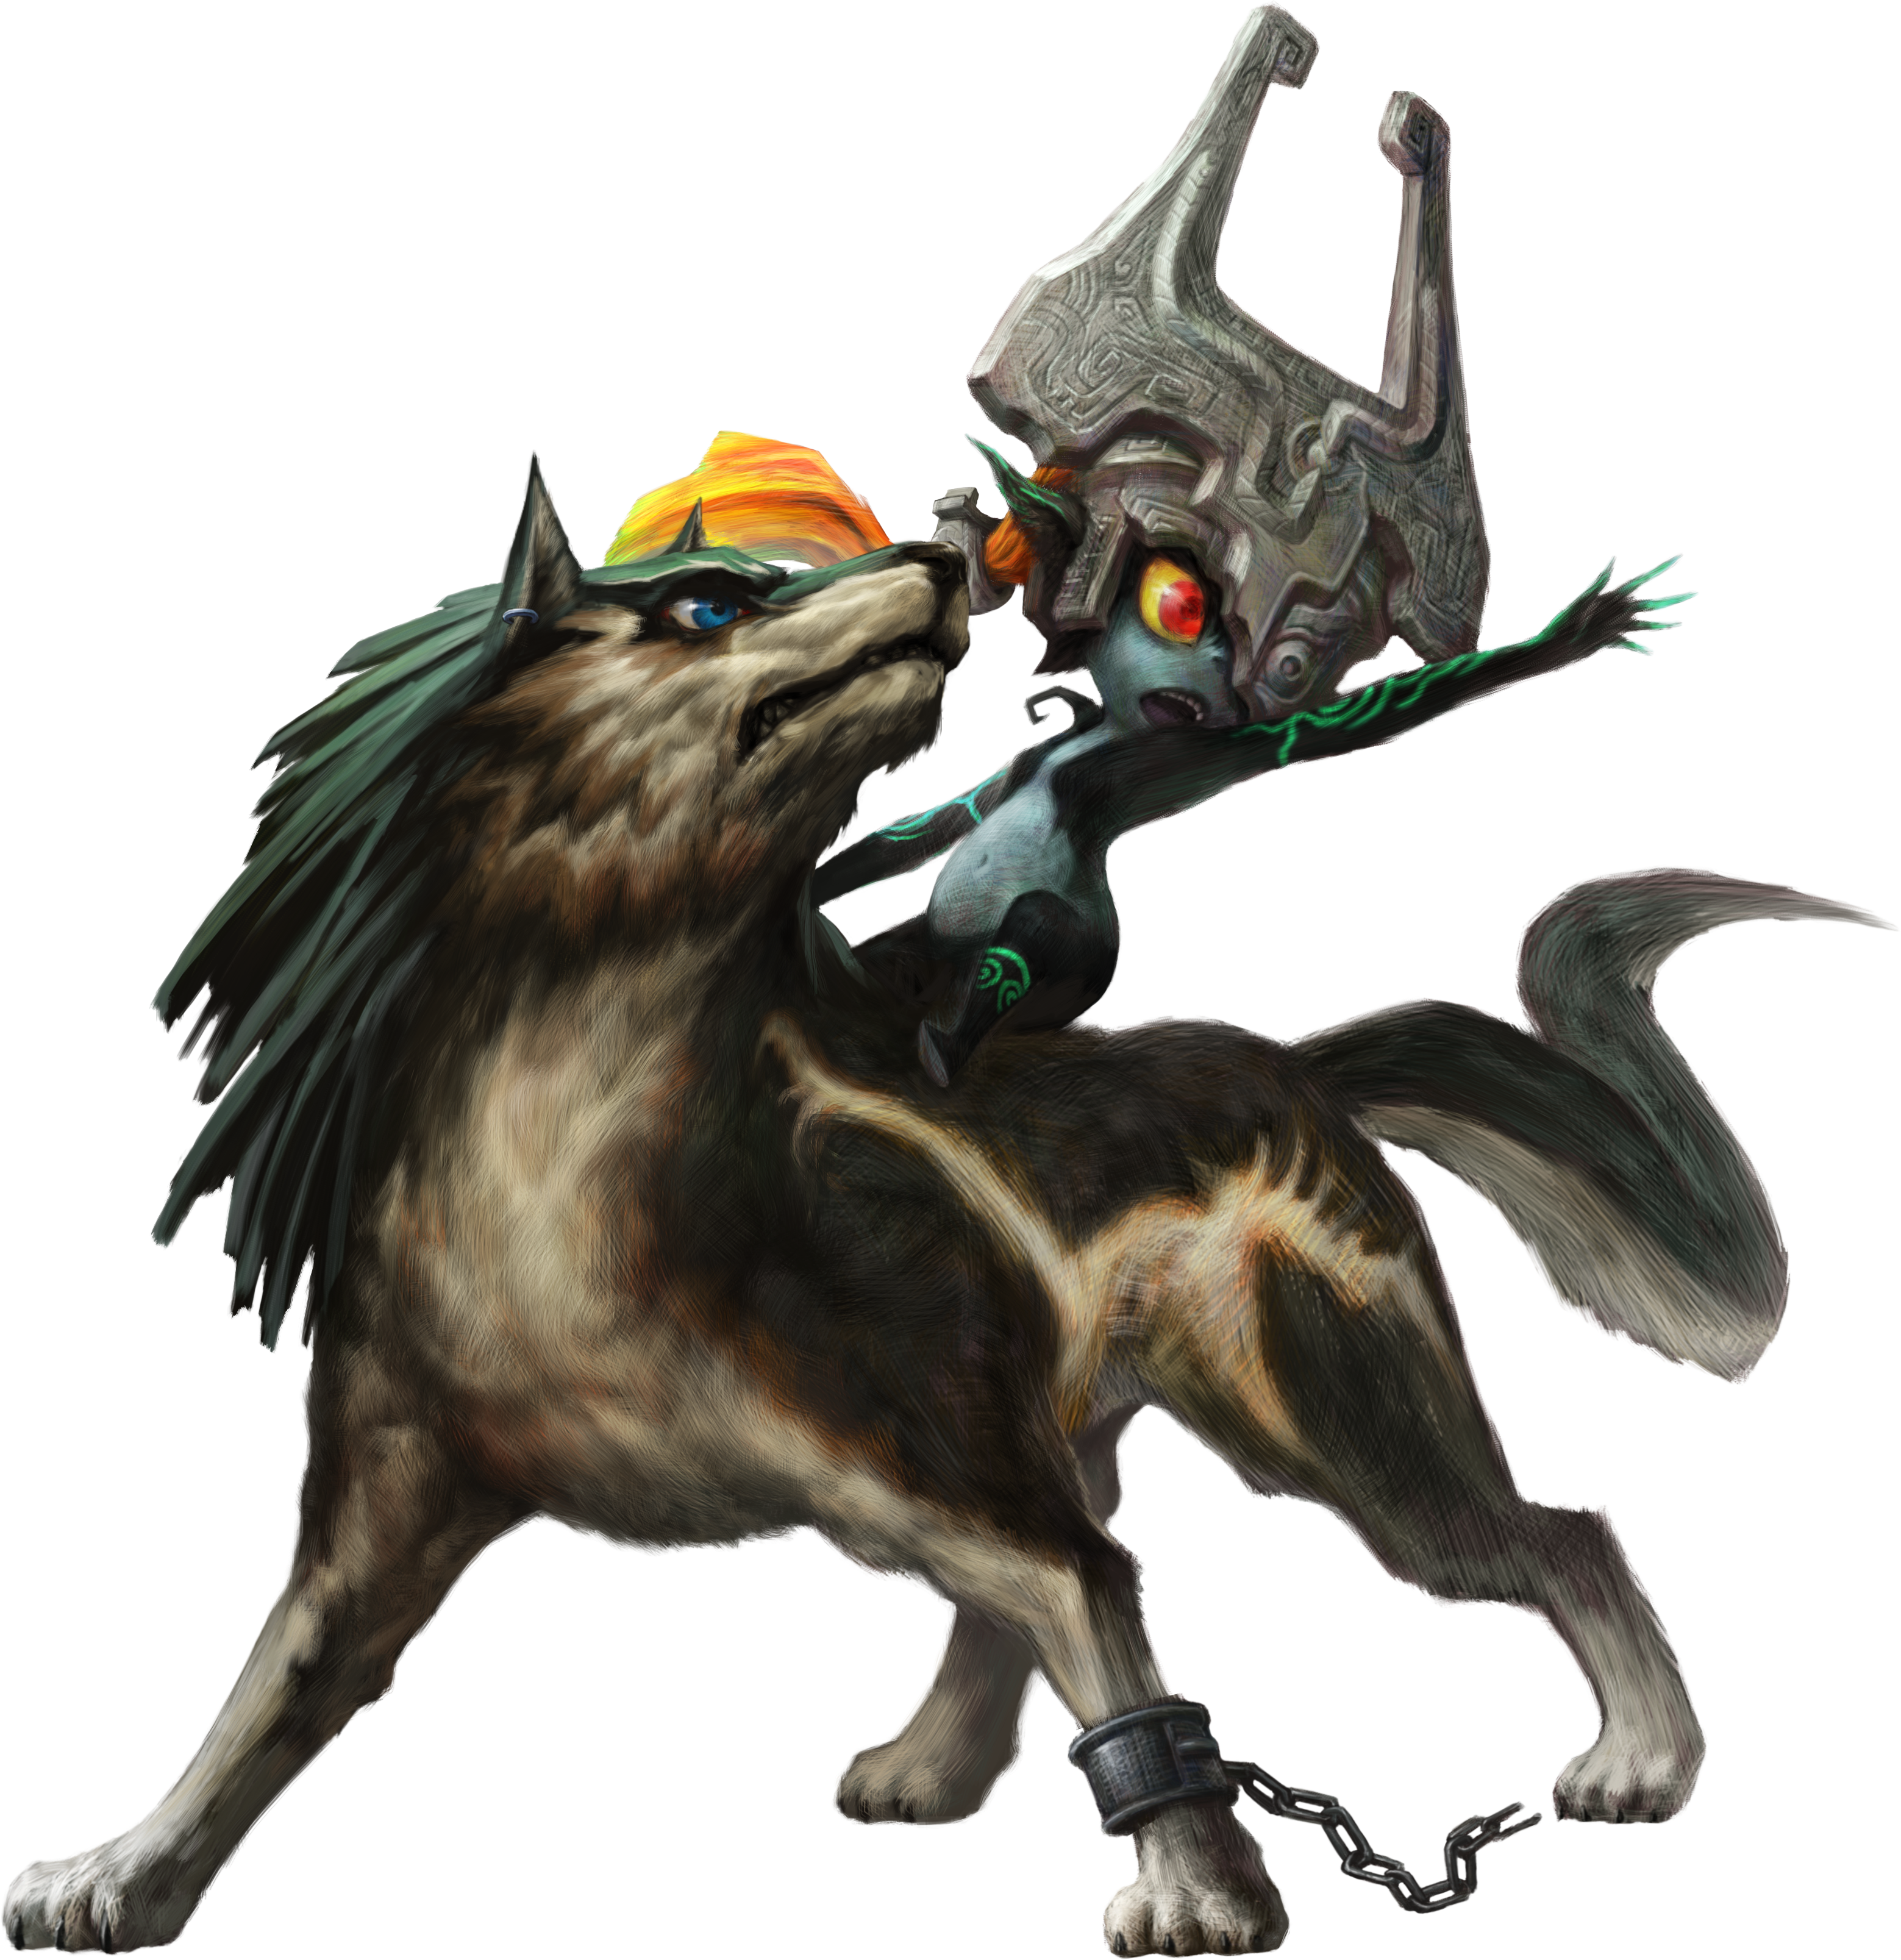 how to get wolf link more hearts in breath of the wild